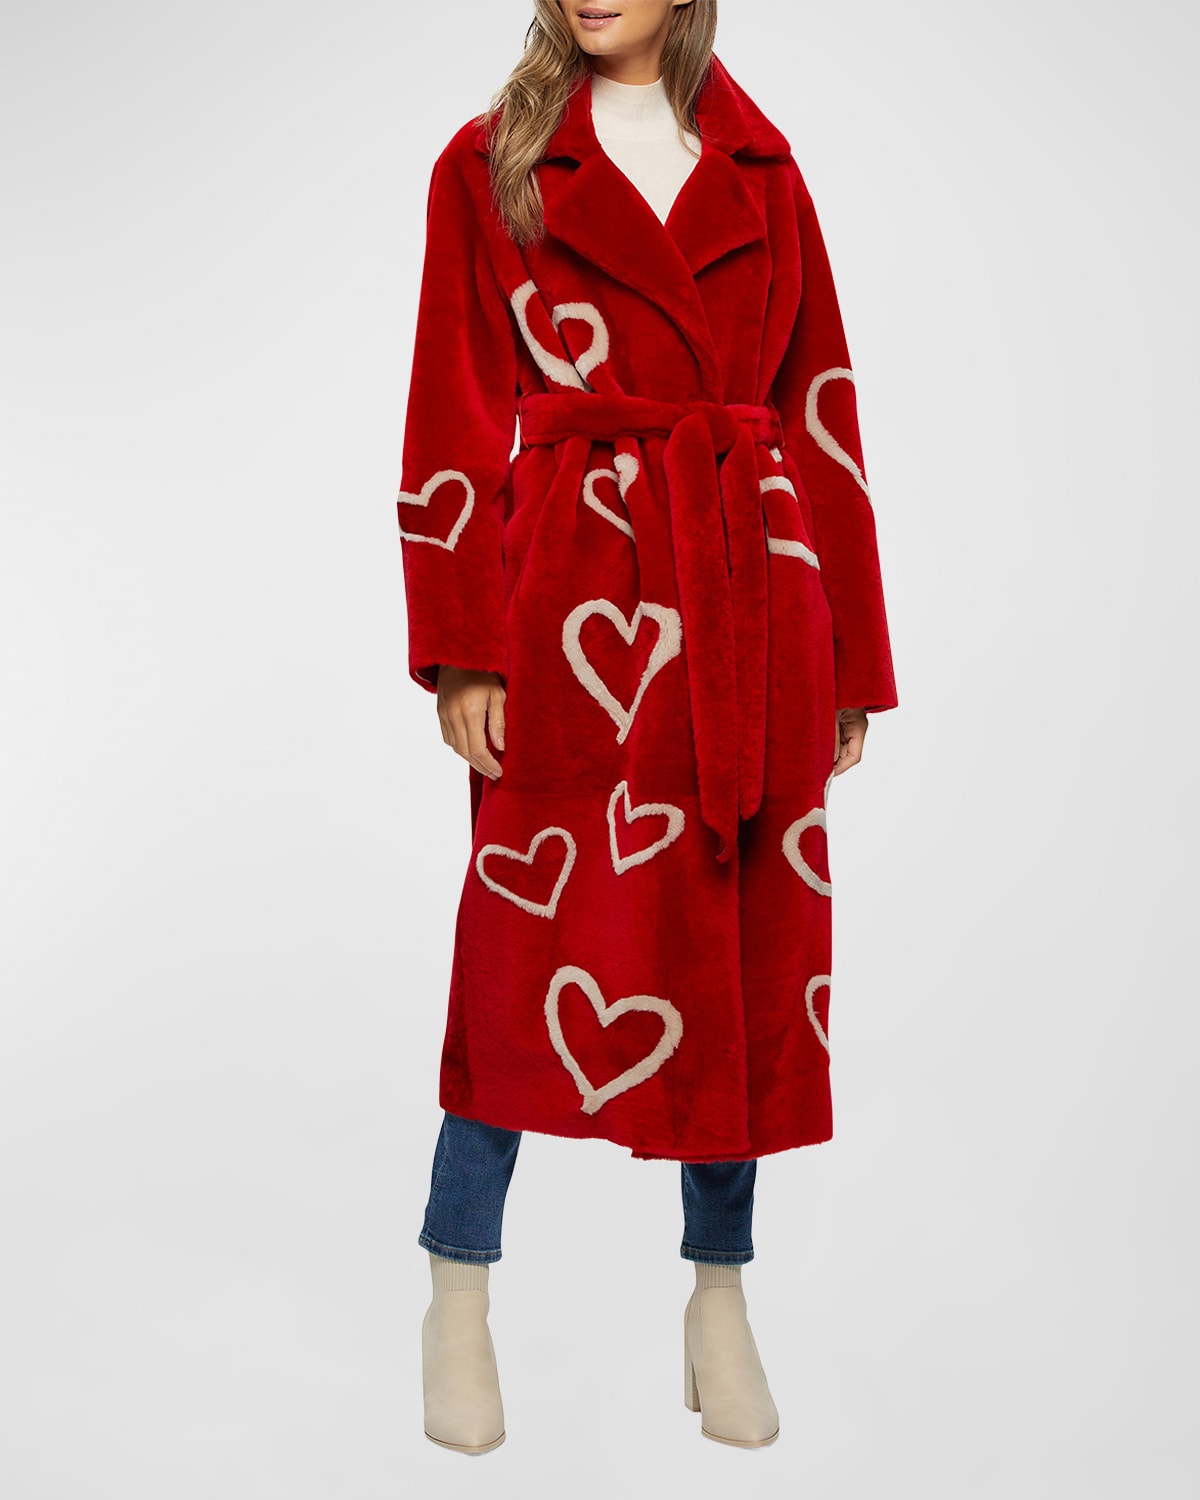 Gorski Shearling Lamb Coat With Heart Intarsia In Red / Beige